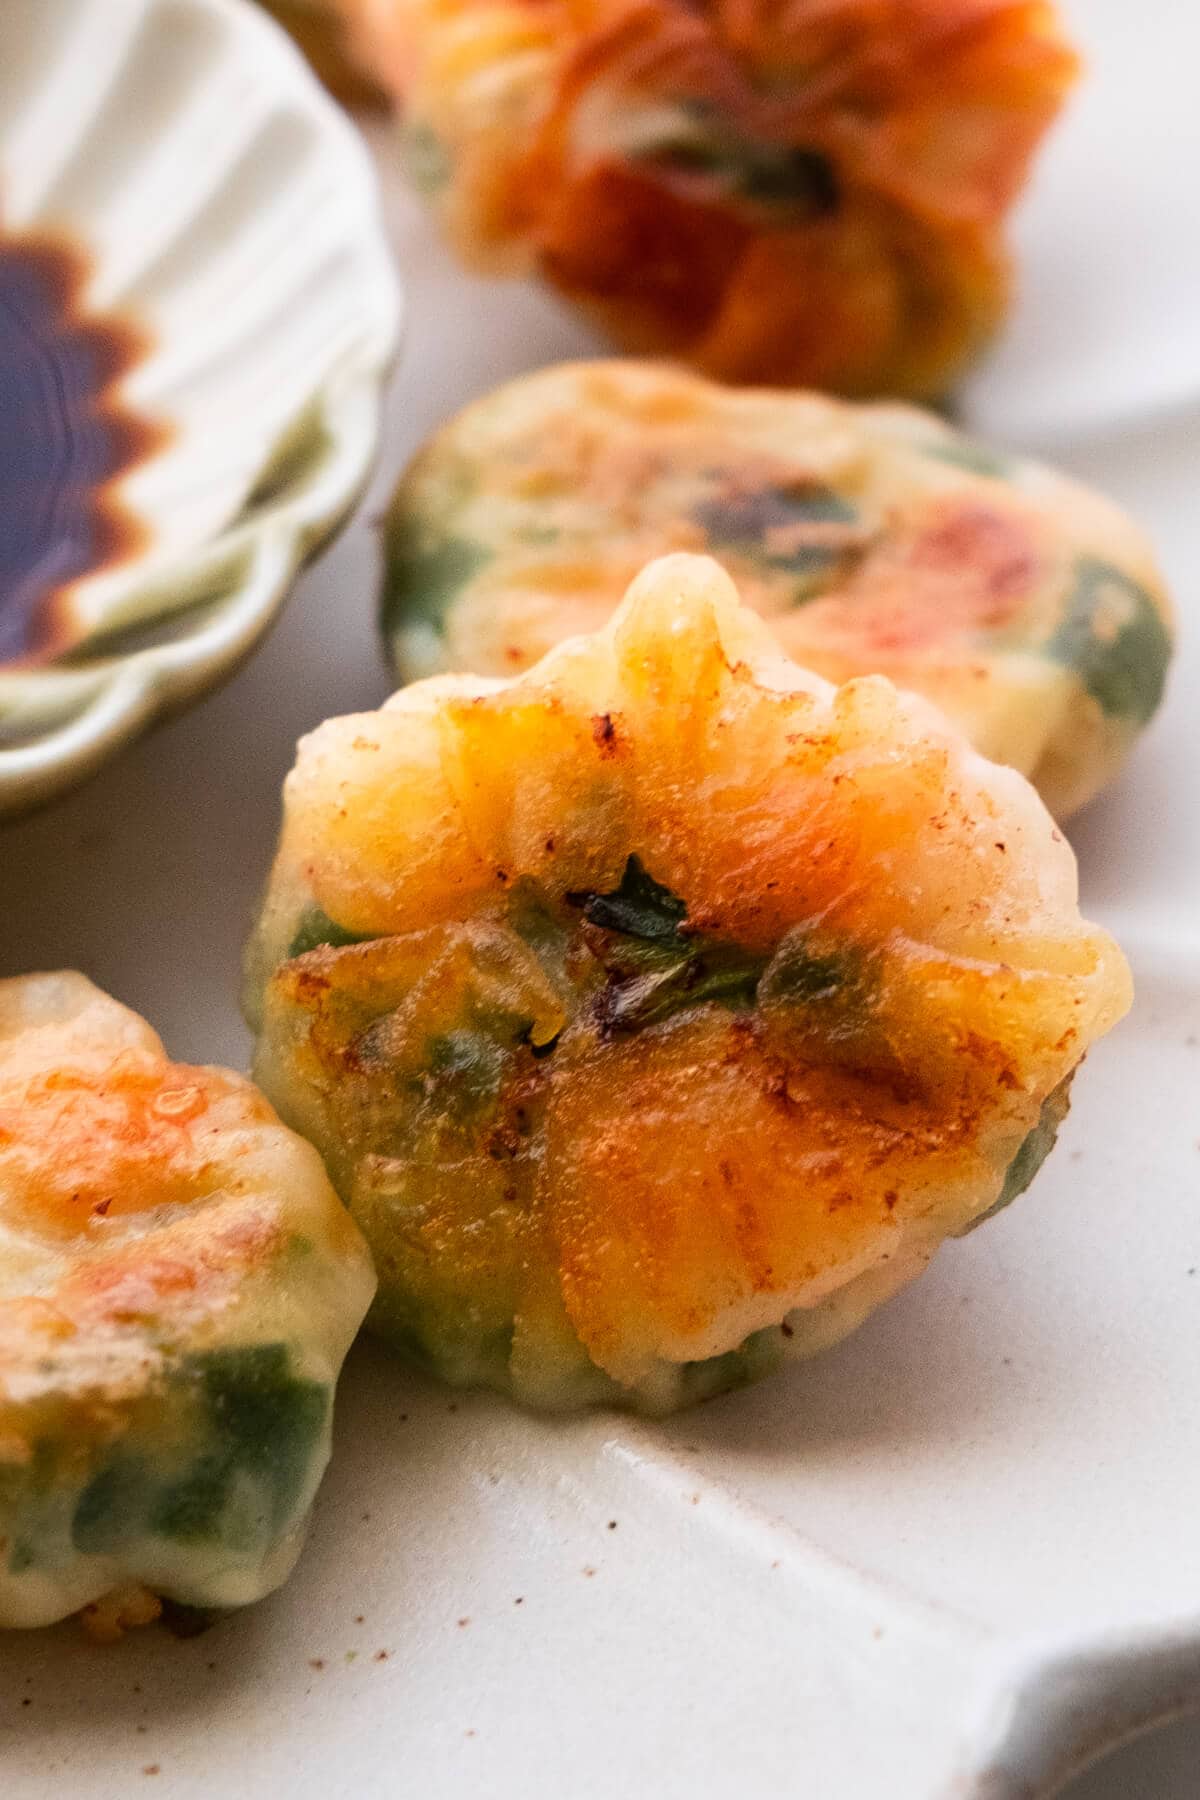 Dumplings with shrimp and chives filling on a plate.